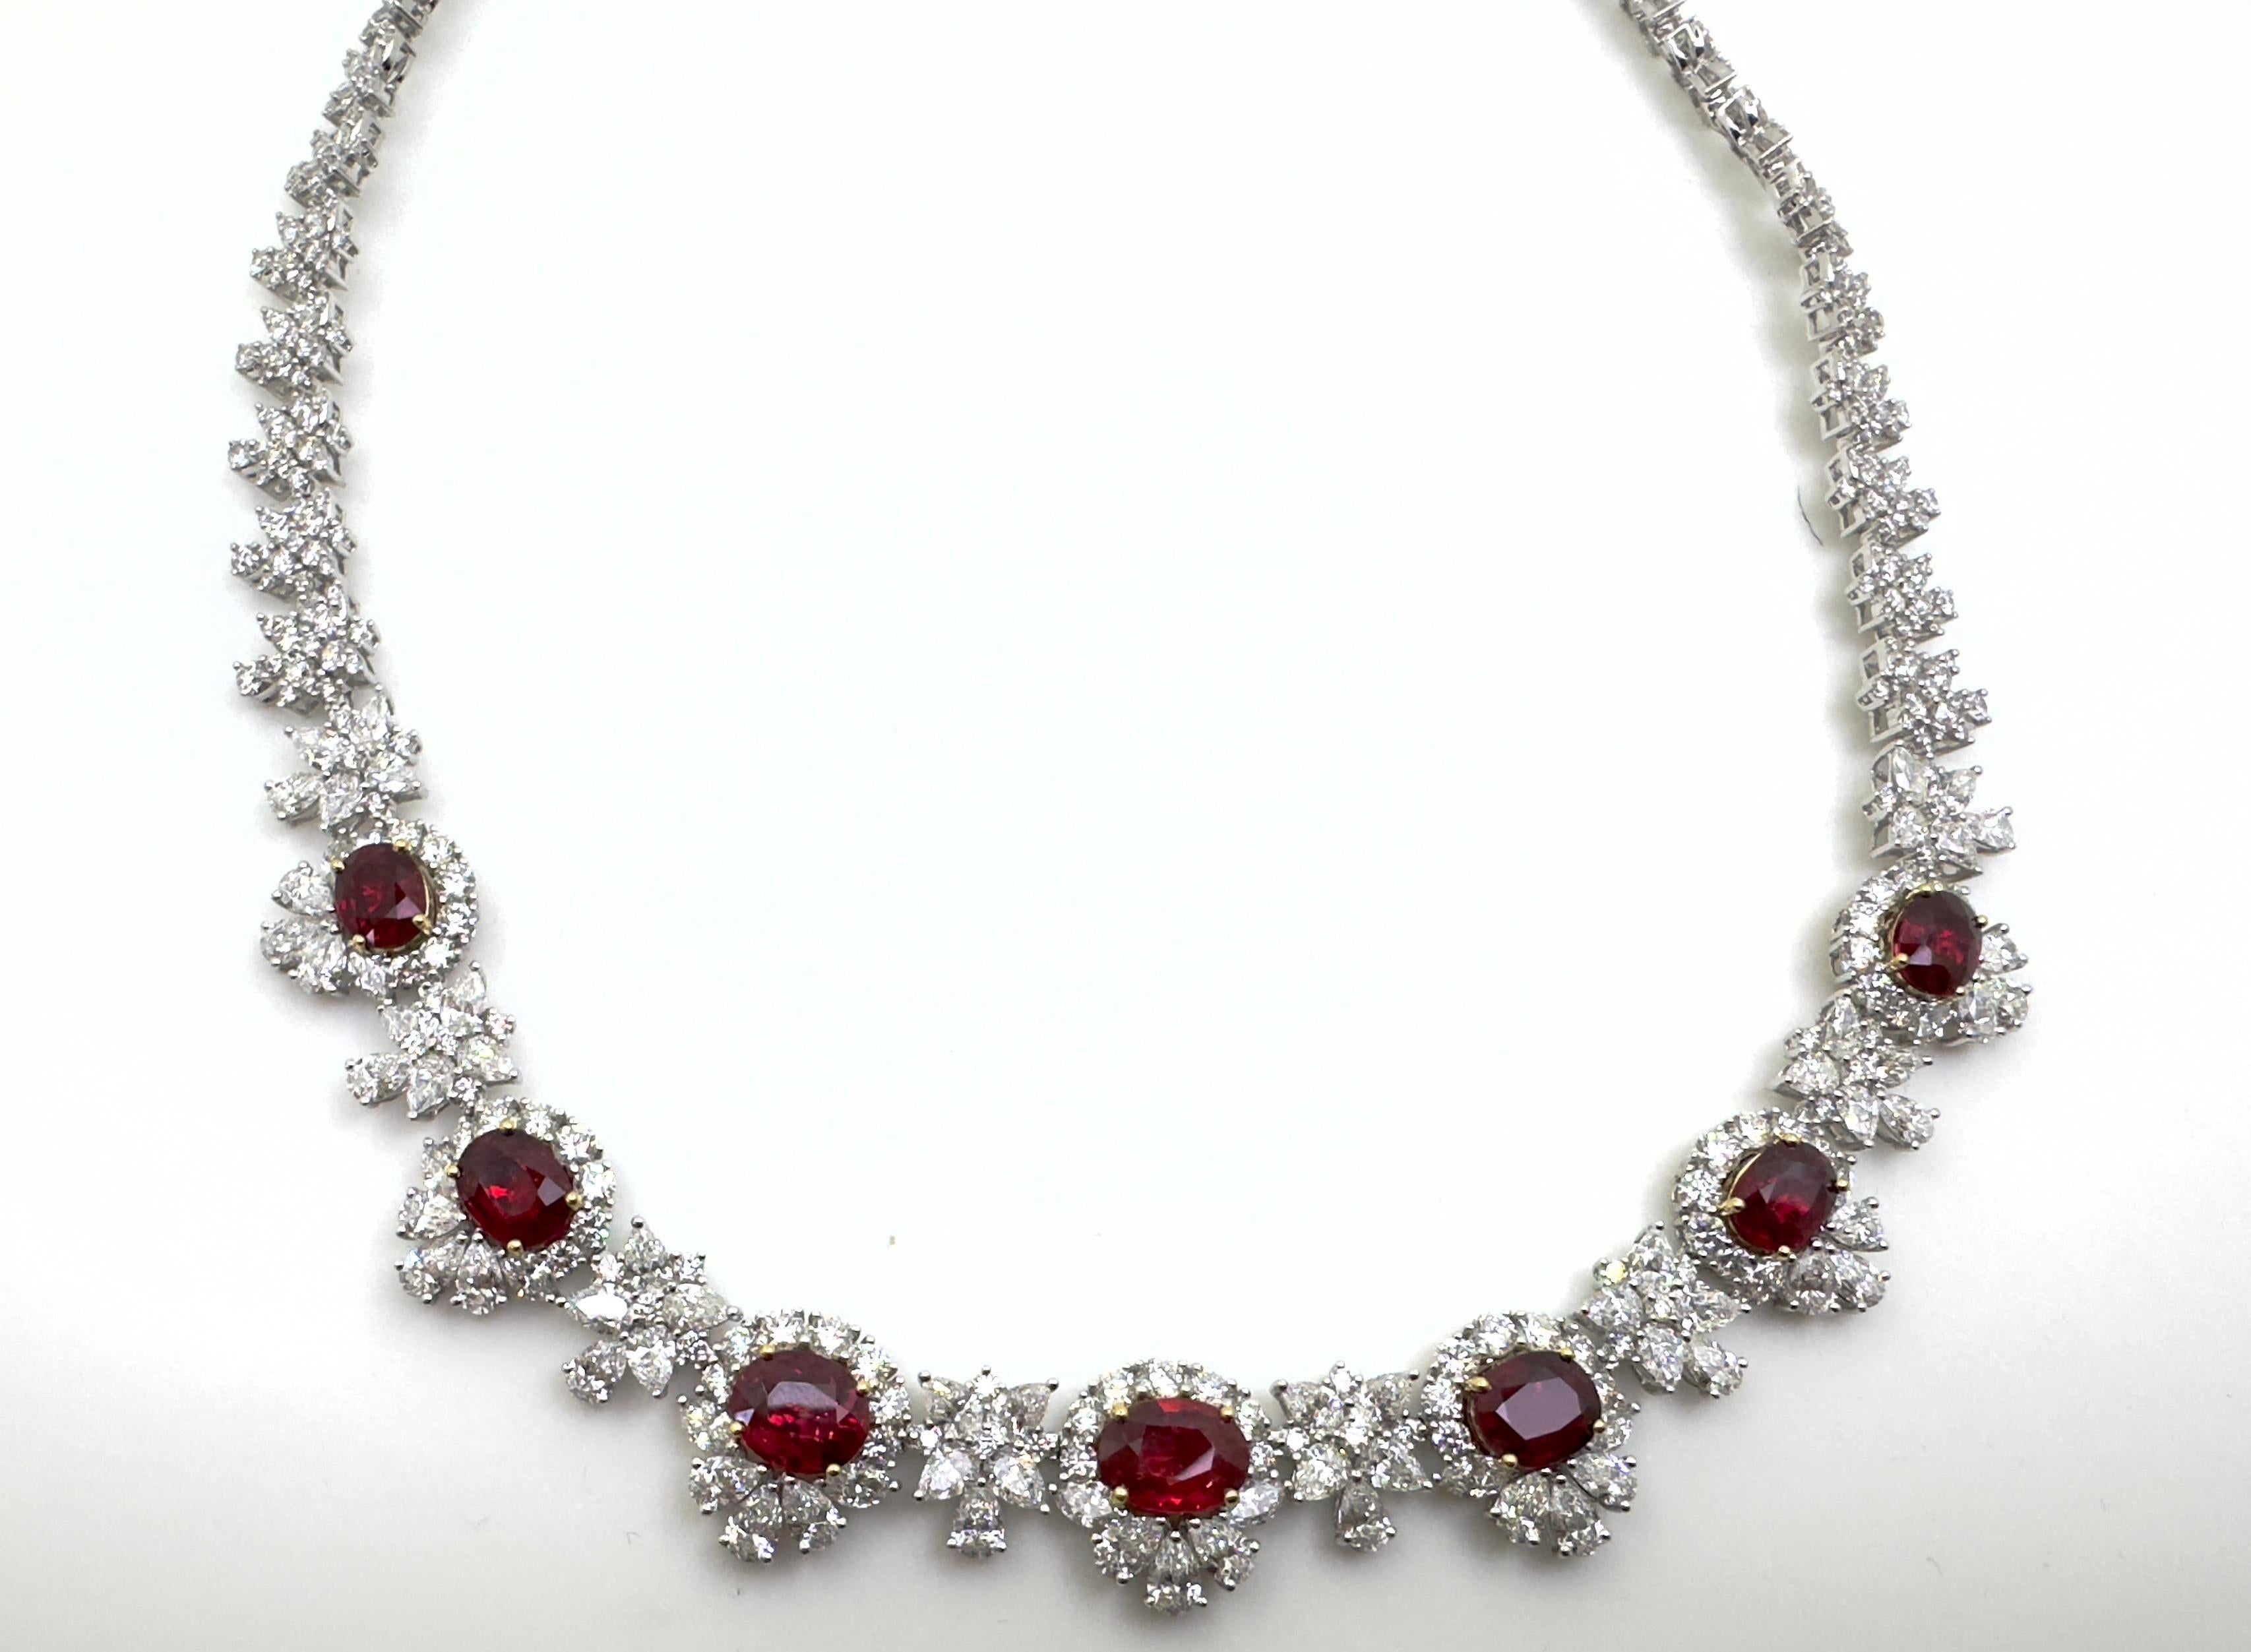 Contemporary GRS Certifed 12.03 Carat Rubies Diamond Necklace in 18 Karat White Gold For Sale